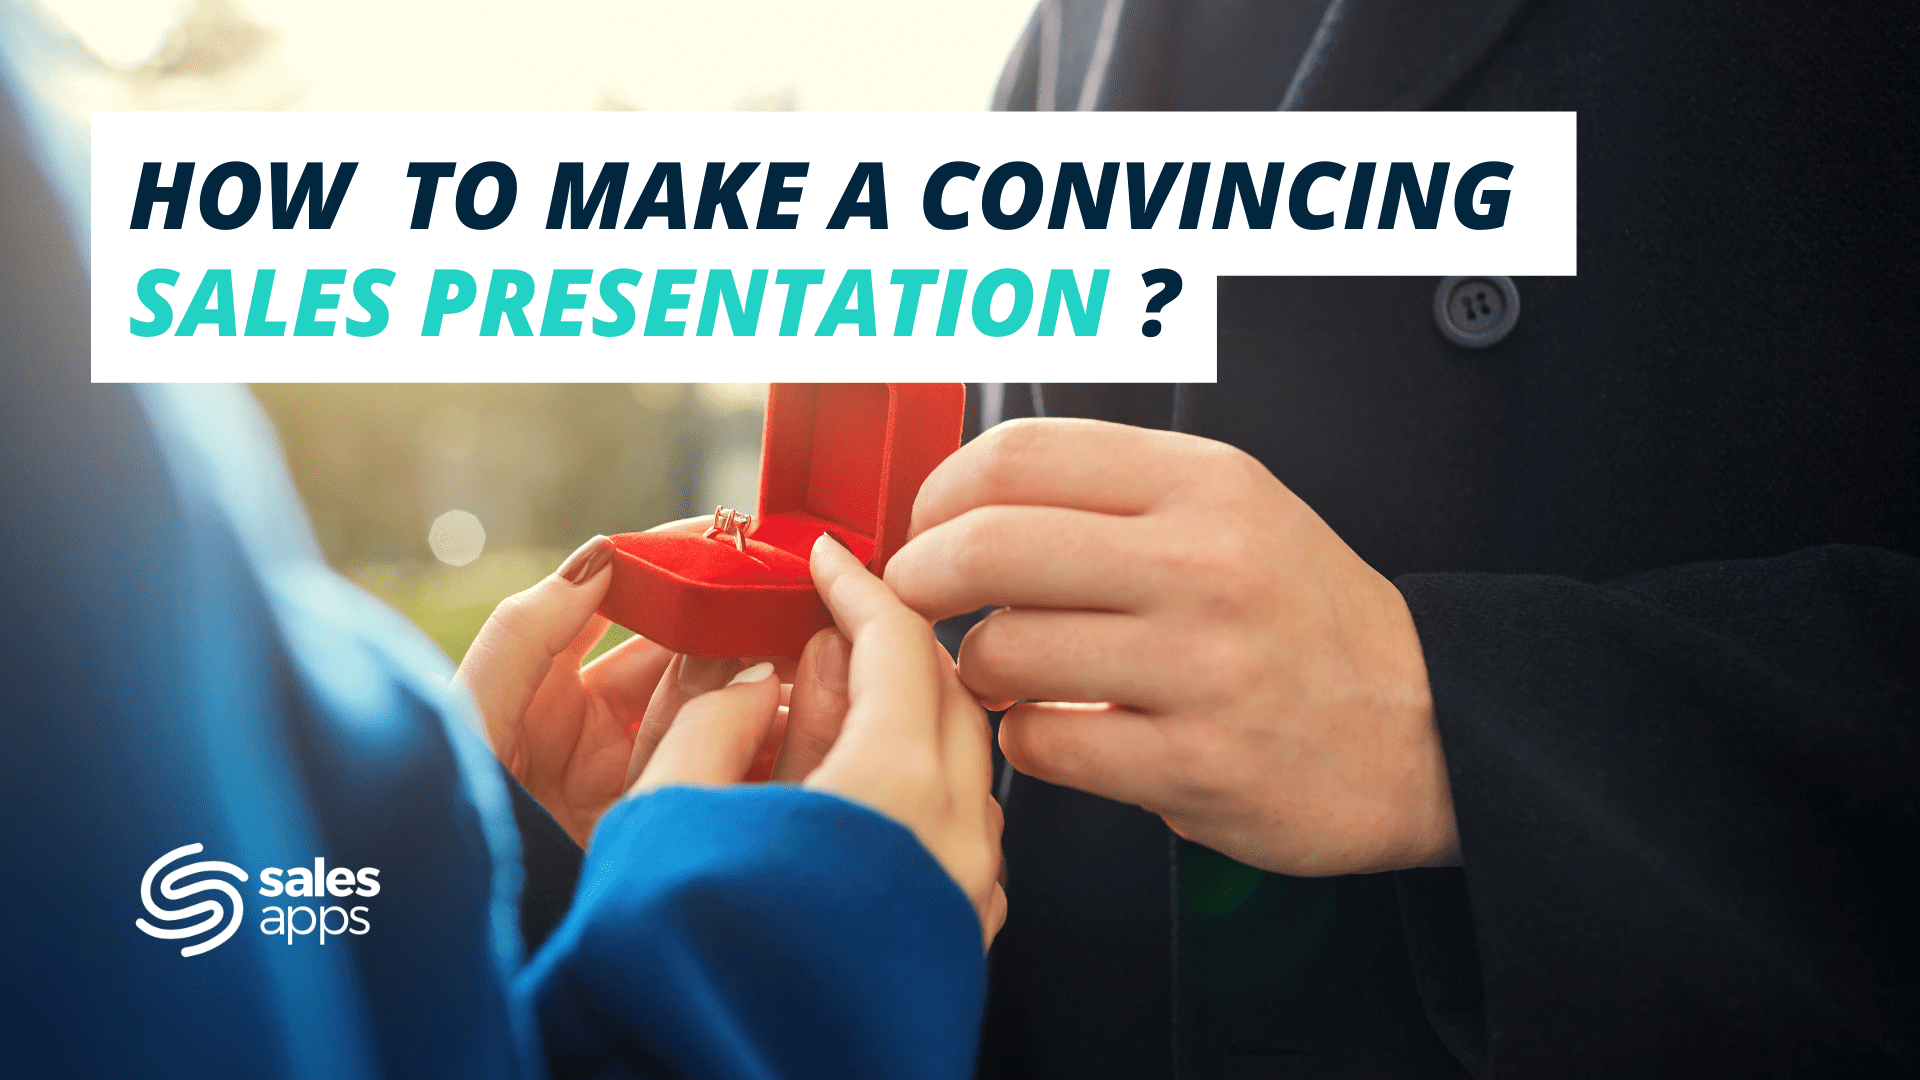 How to make a convincing sales presentation